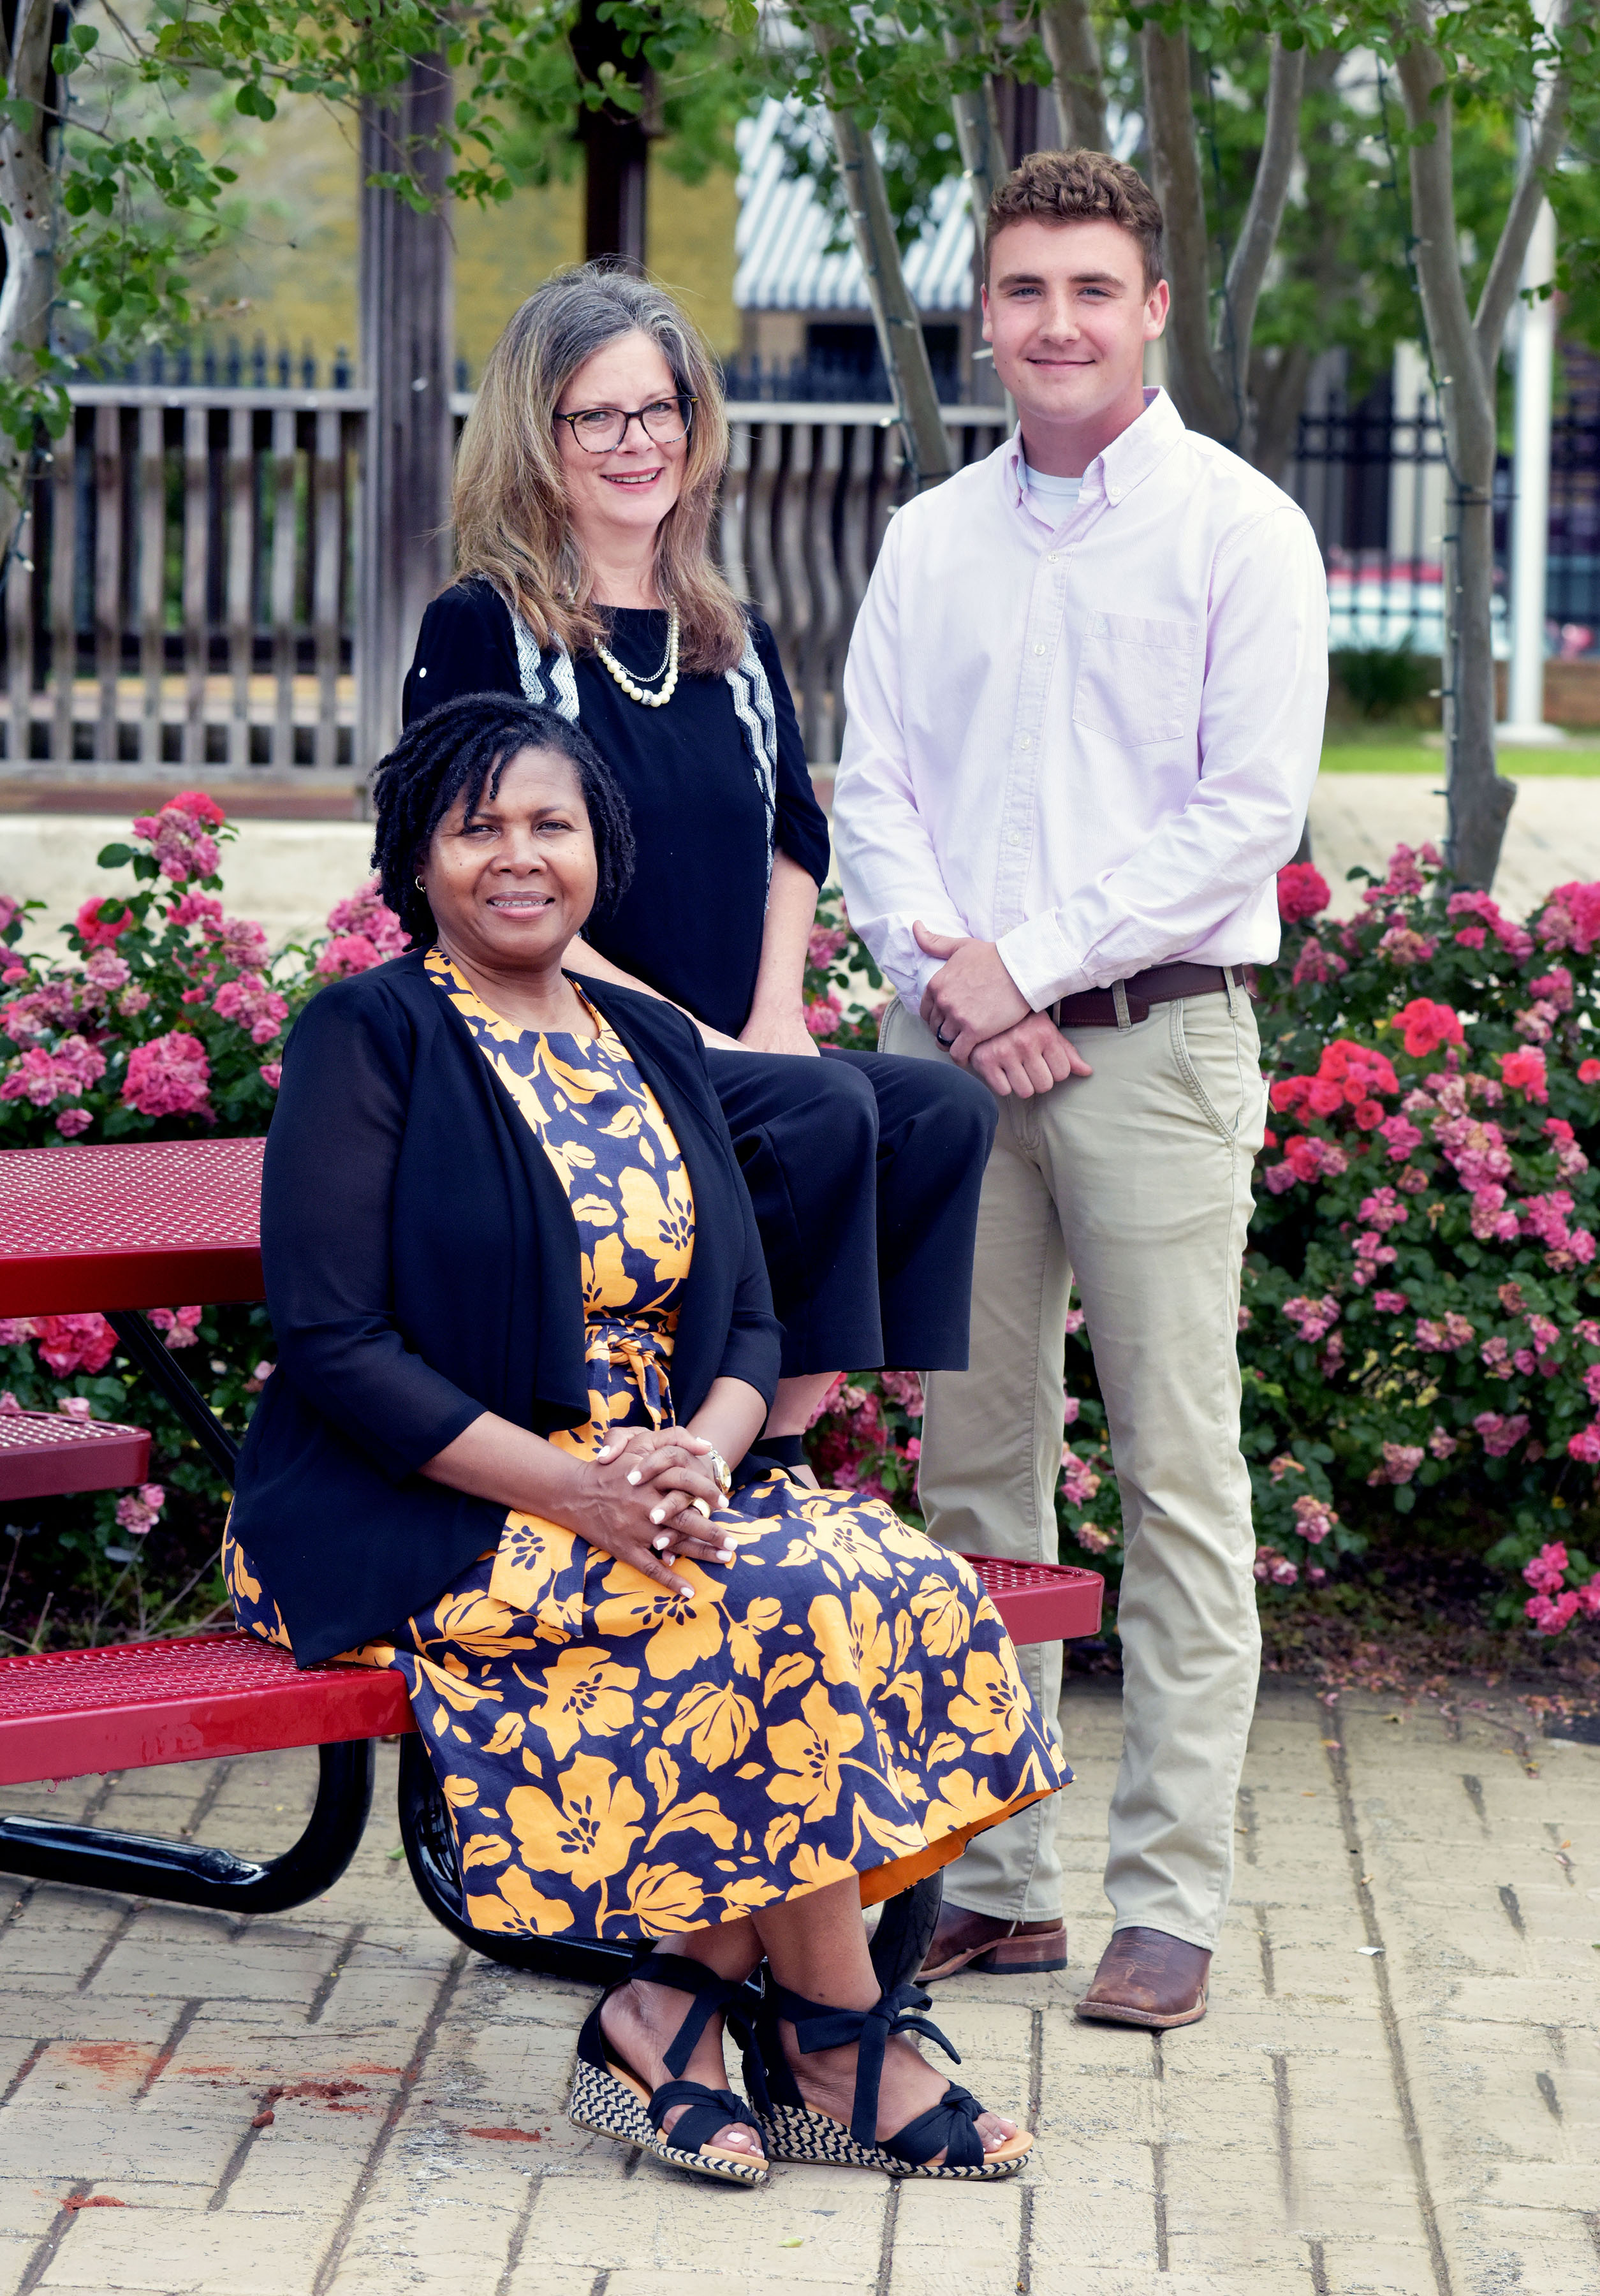 From left to right: Carol Porter, Rhonda Creel and Kyle Ingram are among five outstanding students selected by Mississippi State Faculty for their academic achievements.